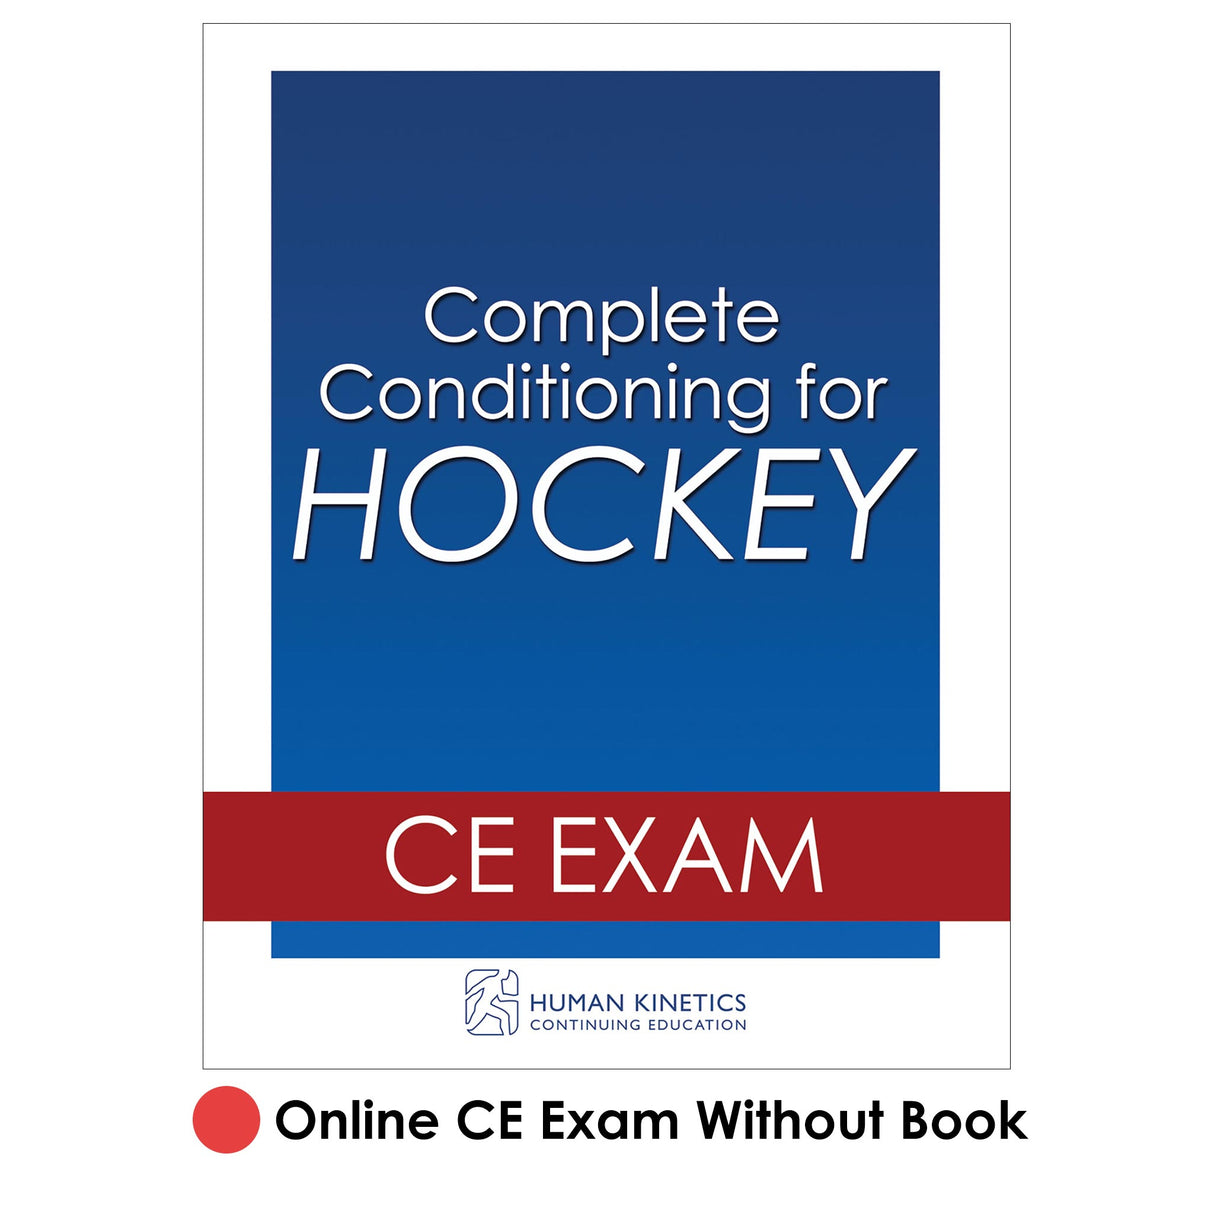 Complete Conditioning for Hockey Online CE Exam Without Book